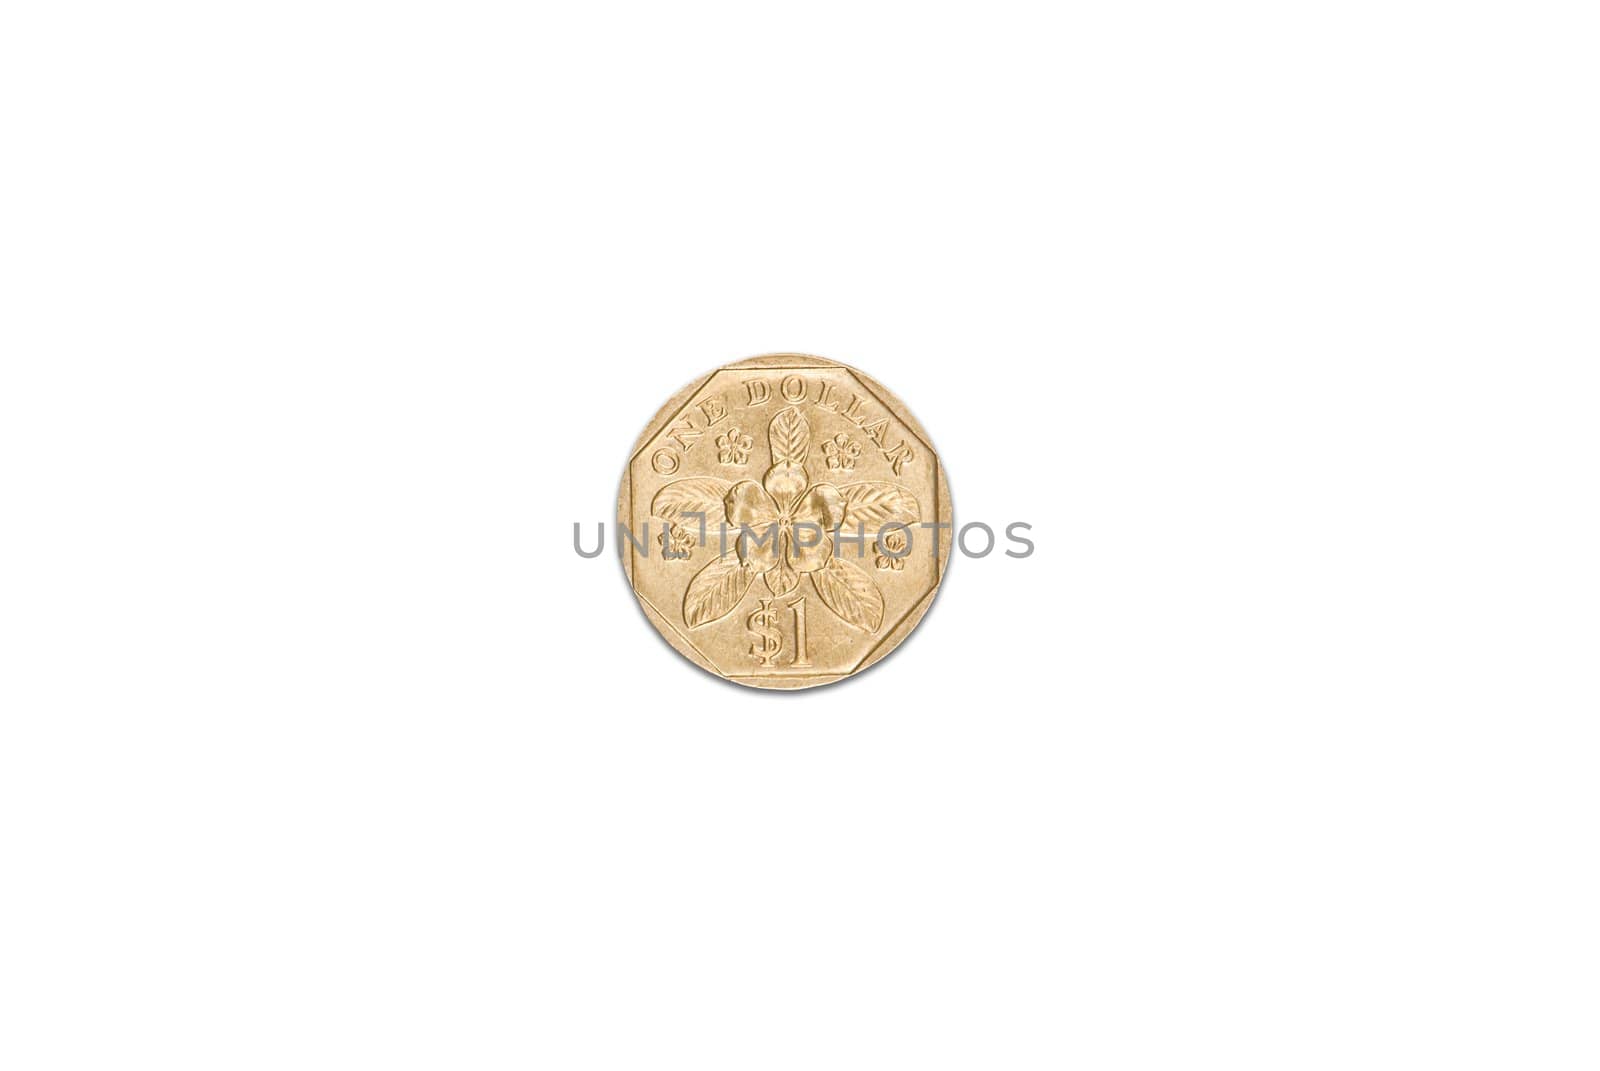 Singapore dollar coin
 by sasilsolutions